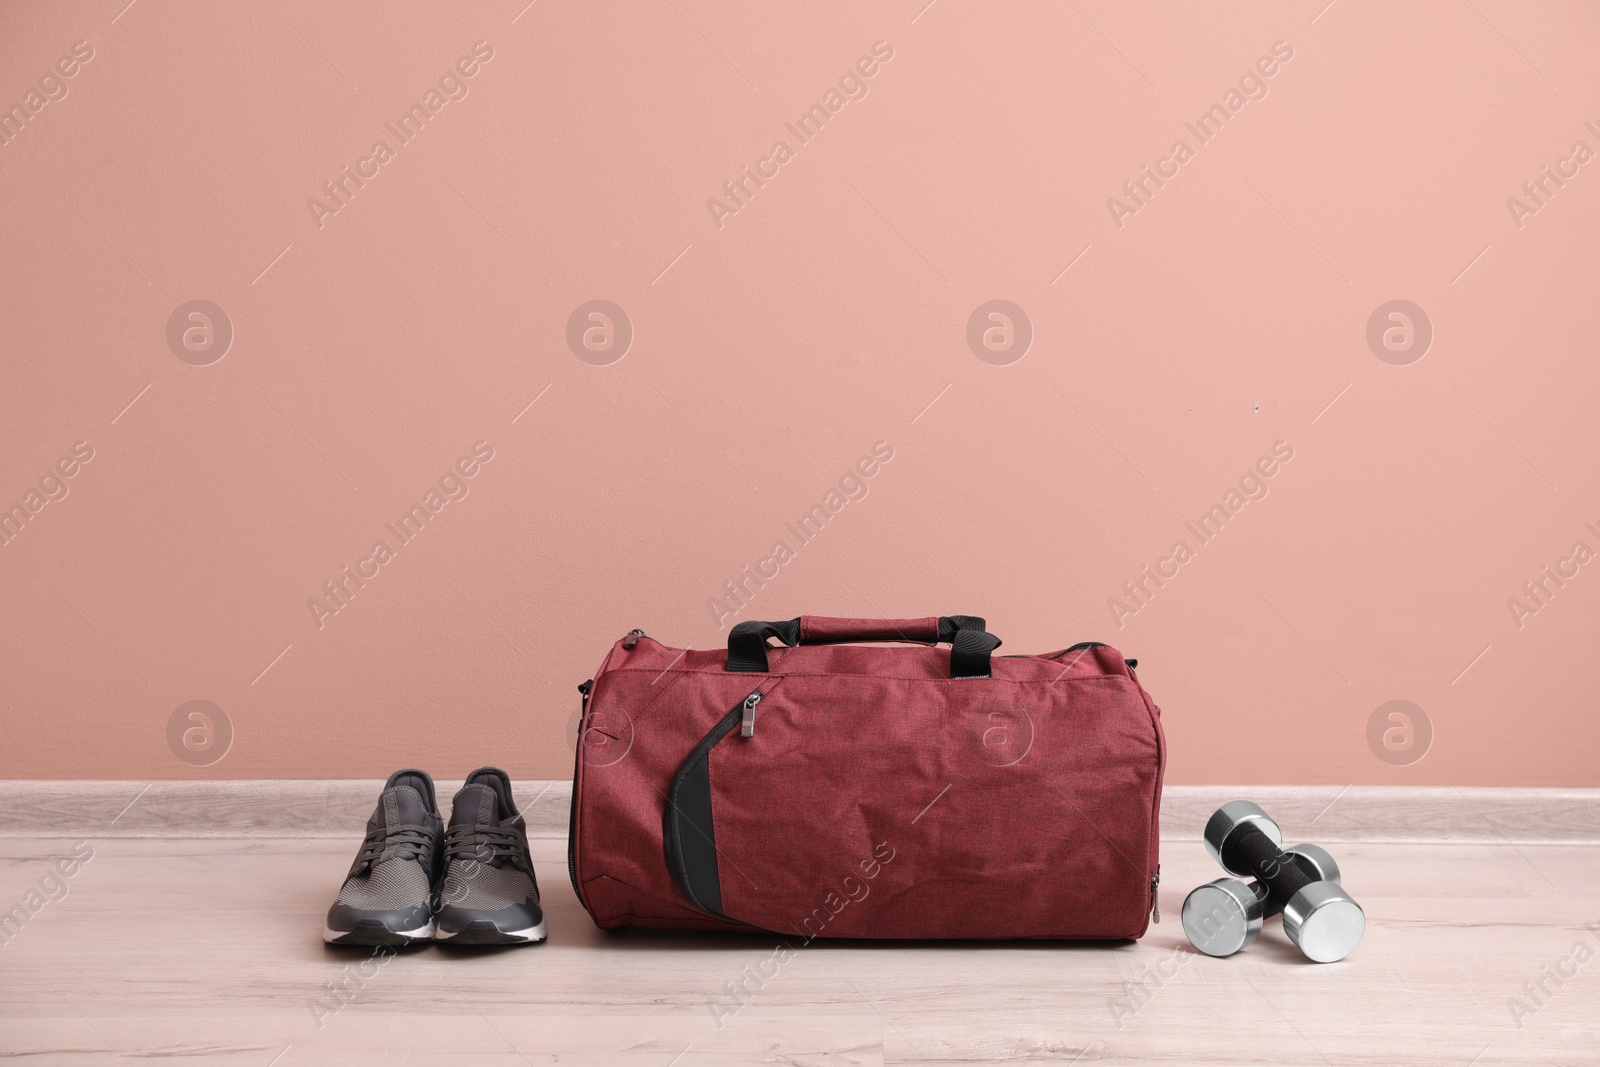 Photo of Red sports bag, sneakers and dumbbells on floor near pink wall, space for text